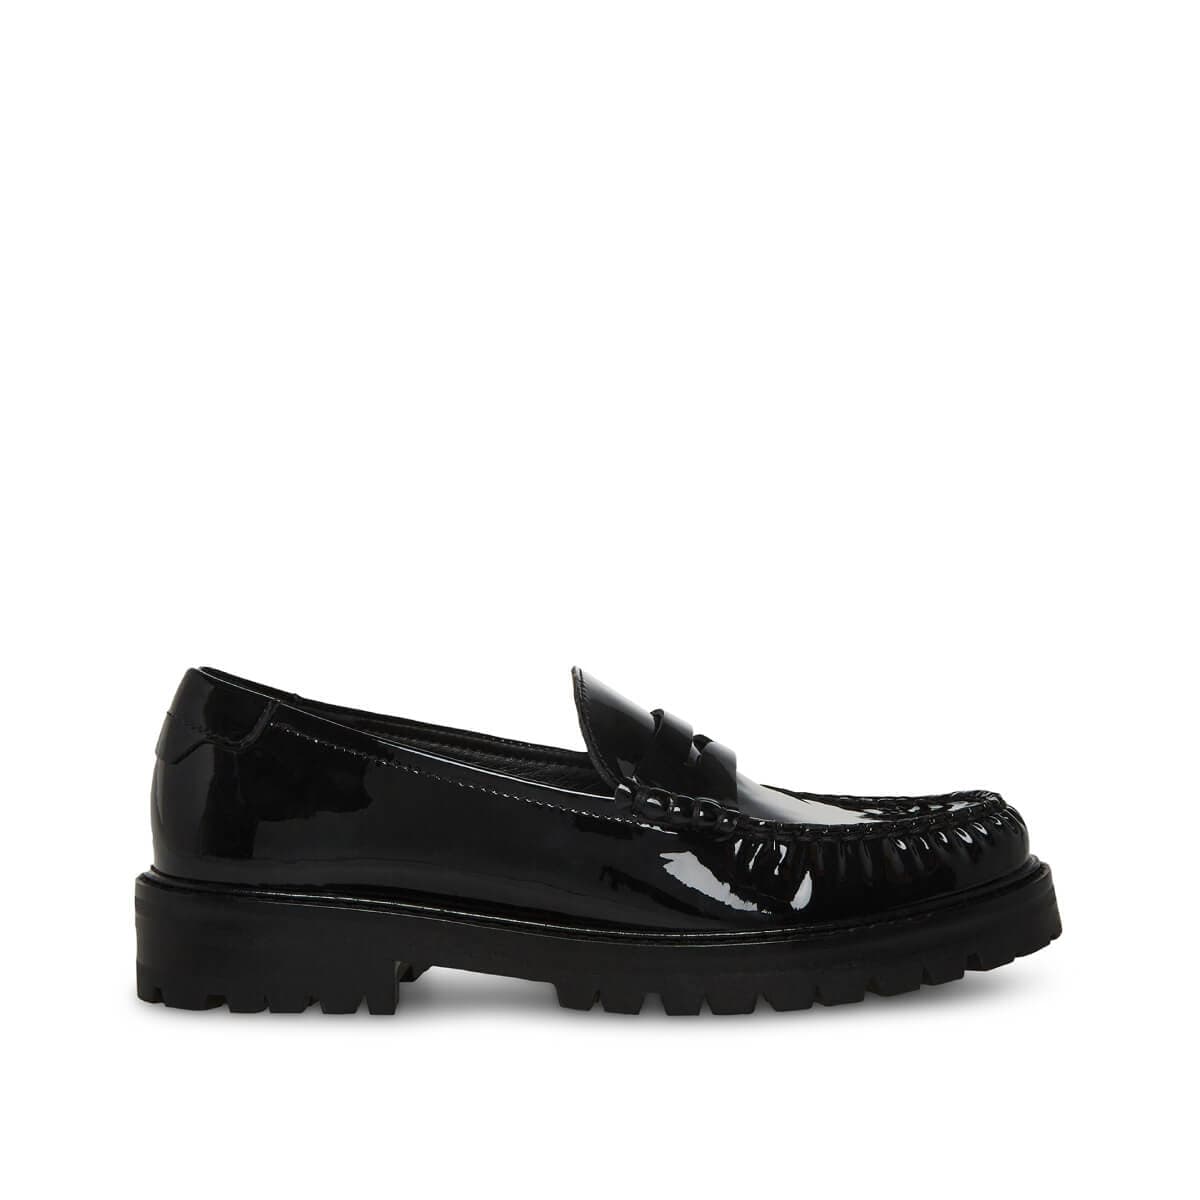 Steve Madden Madelyn Patent Penny Loafers